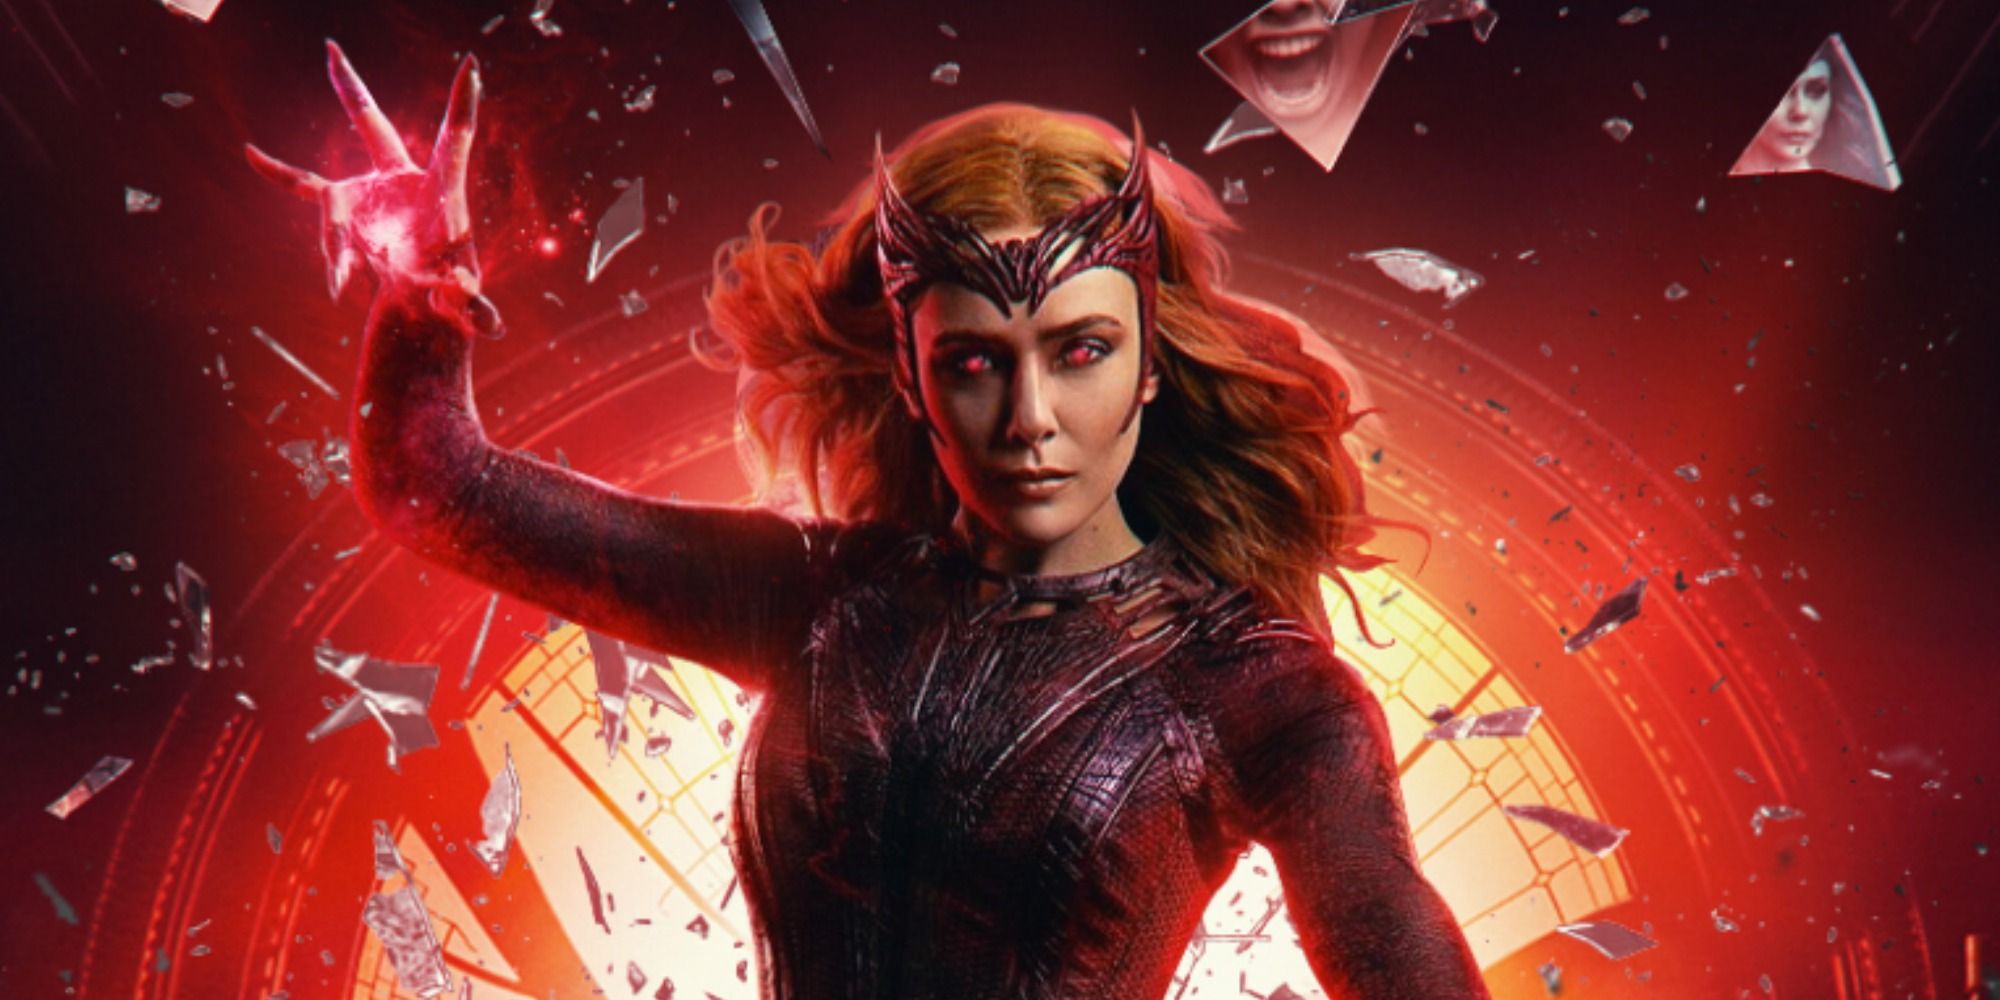 The Scarlet Witch uses her powers in Doctor Strange in the Multiverse of Madness.